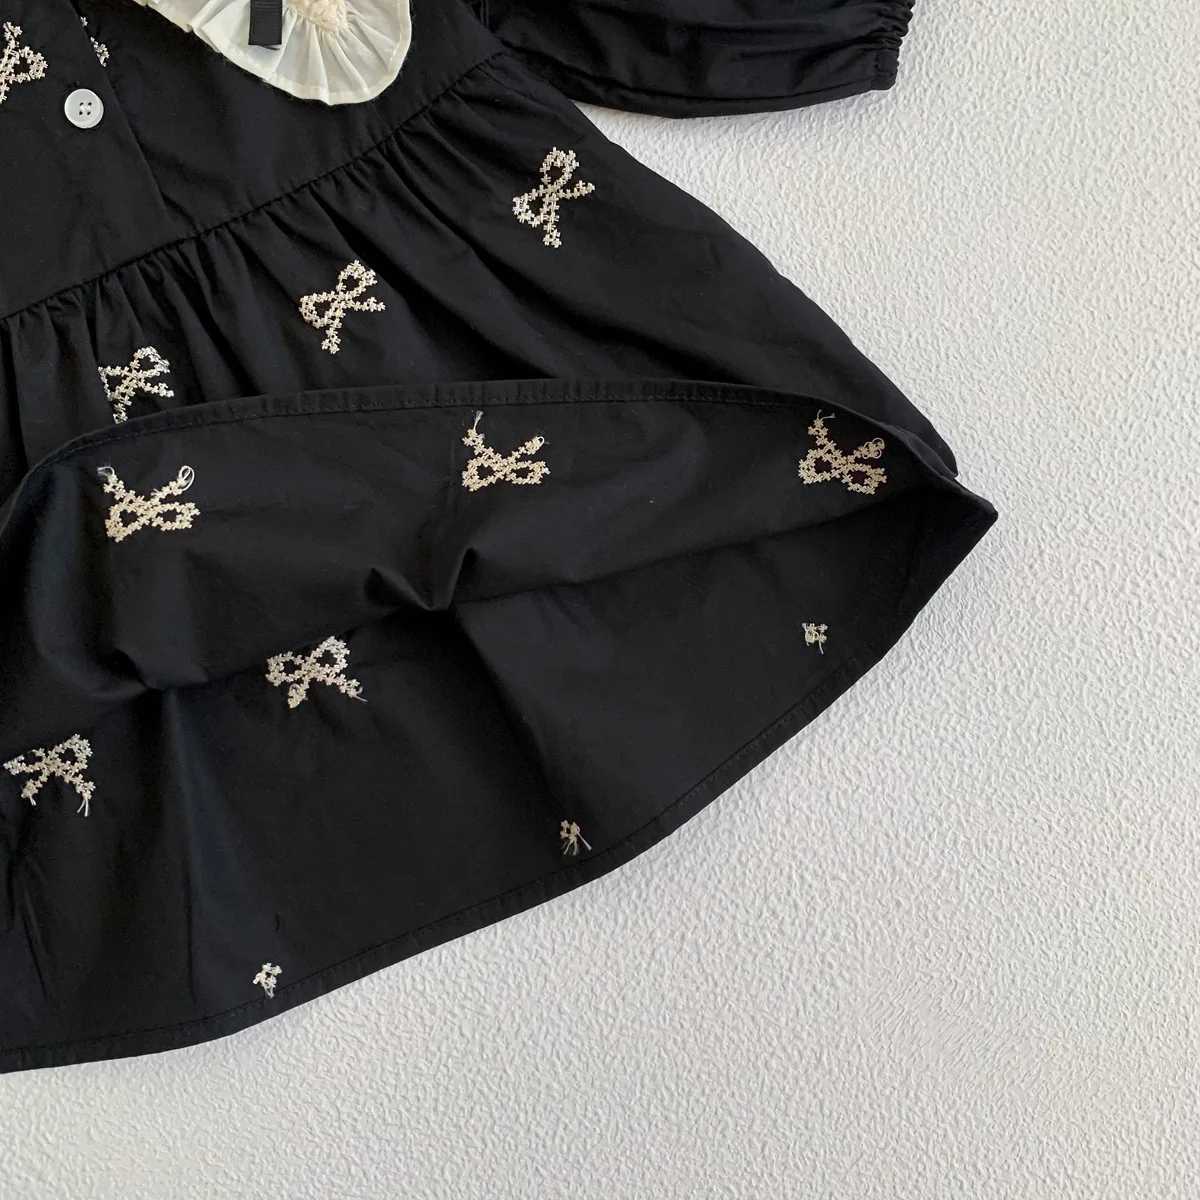 Rompers Spring New Lace Collar Baby Romper Infant Black Flower Bodysuit Girls Cotton Jumpsuit Clothes H240426